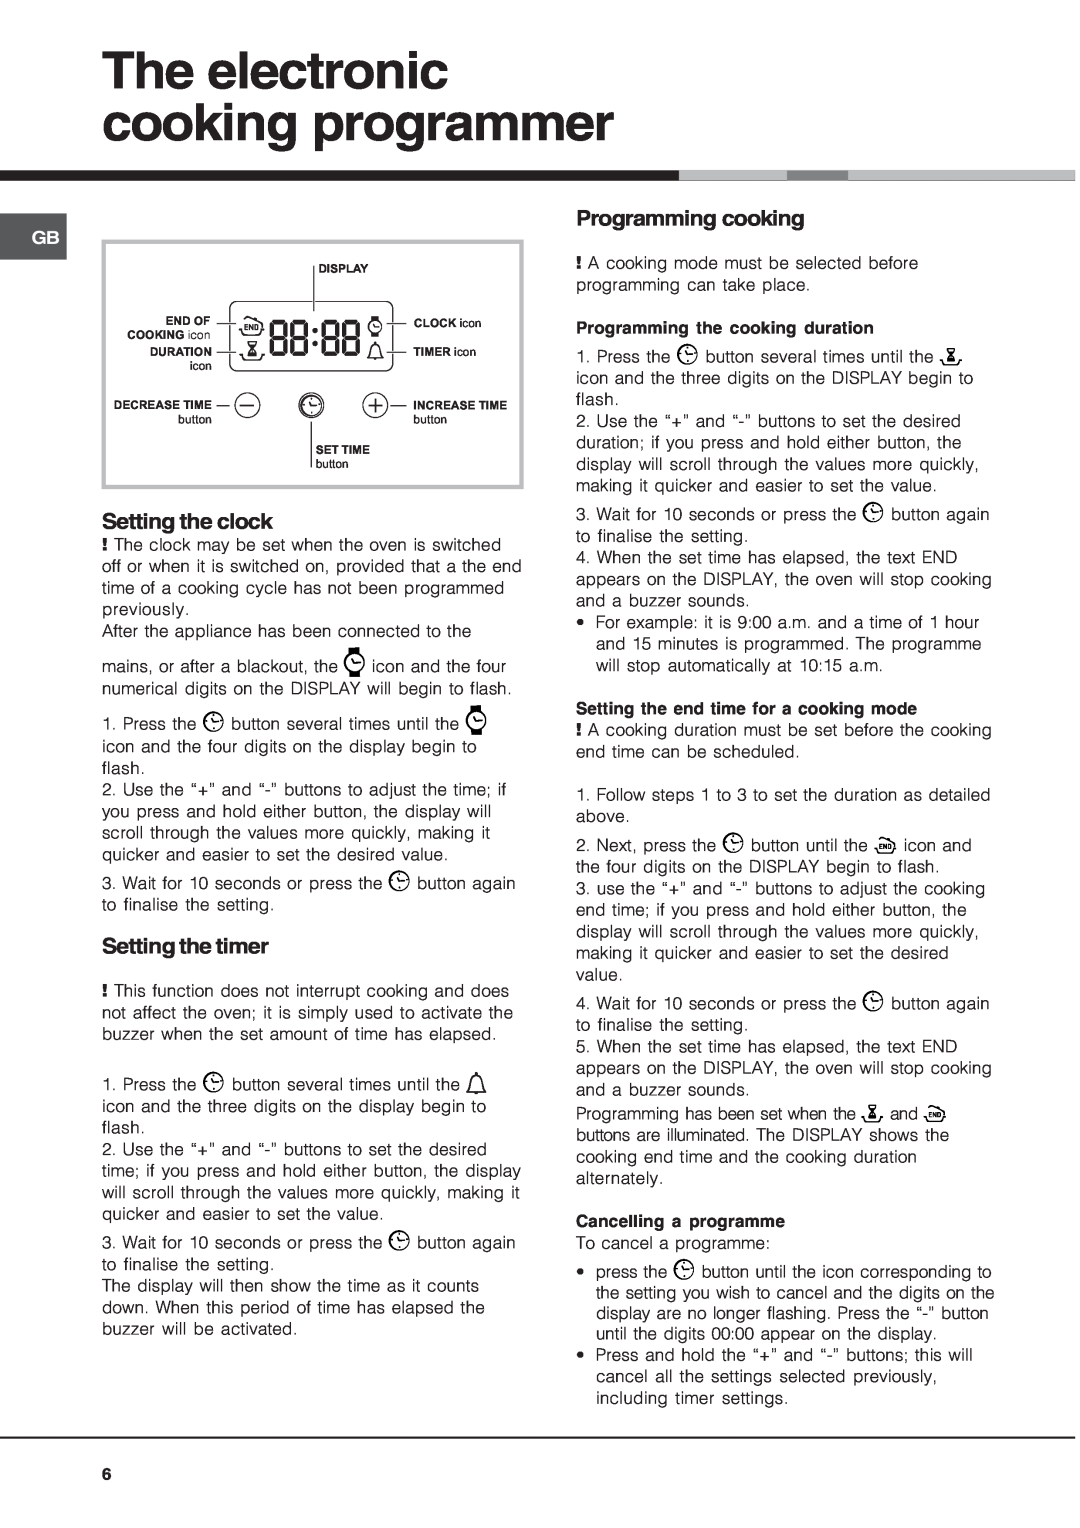 Hotpoint BS53X1 operating instructions The electronic cooking programmer 